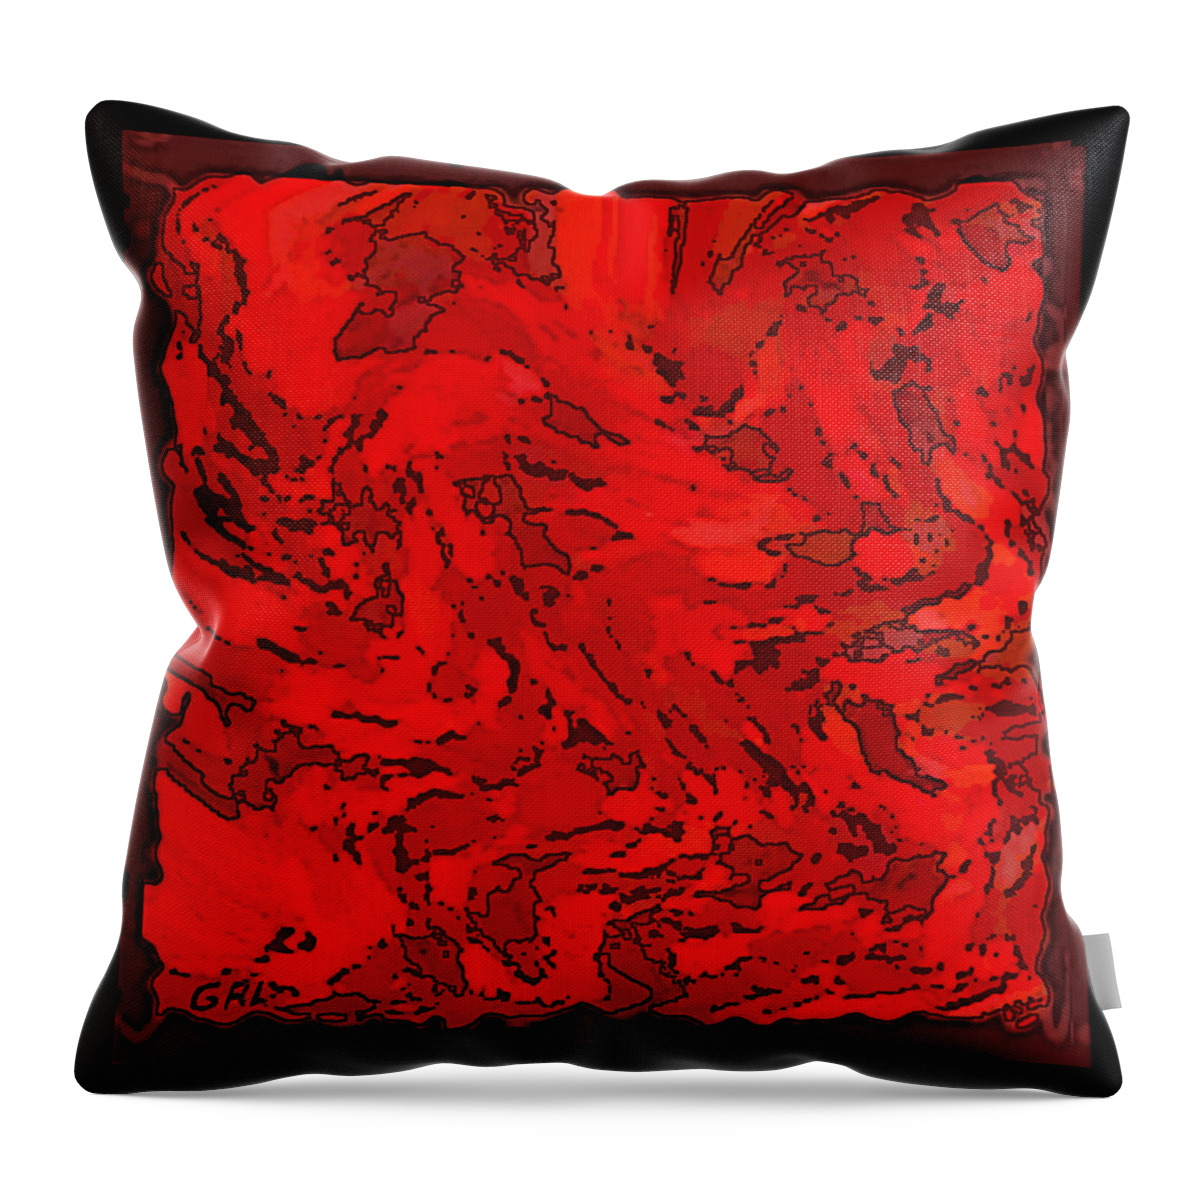 Color Throw Pillow featuring the painting Color Of Red Vi I Contemporary Digital Art by G Linsenmayer